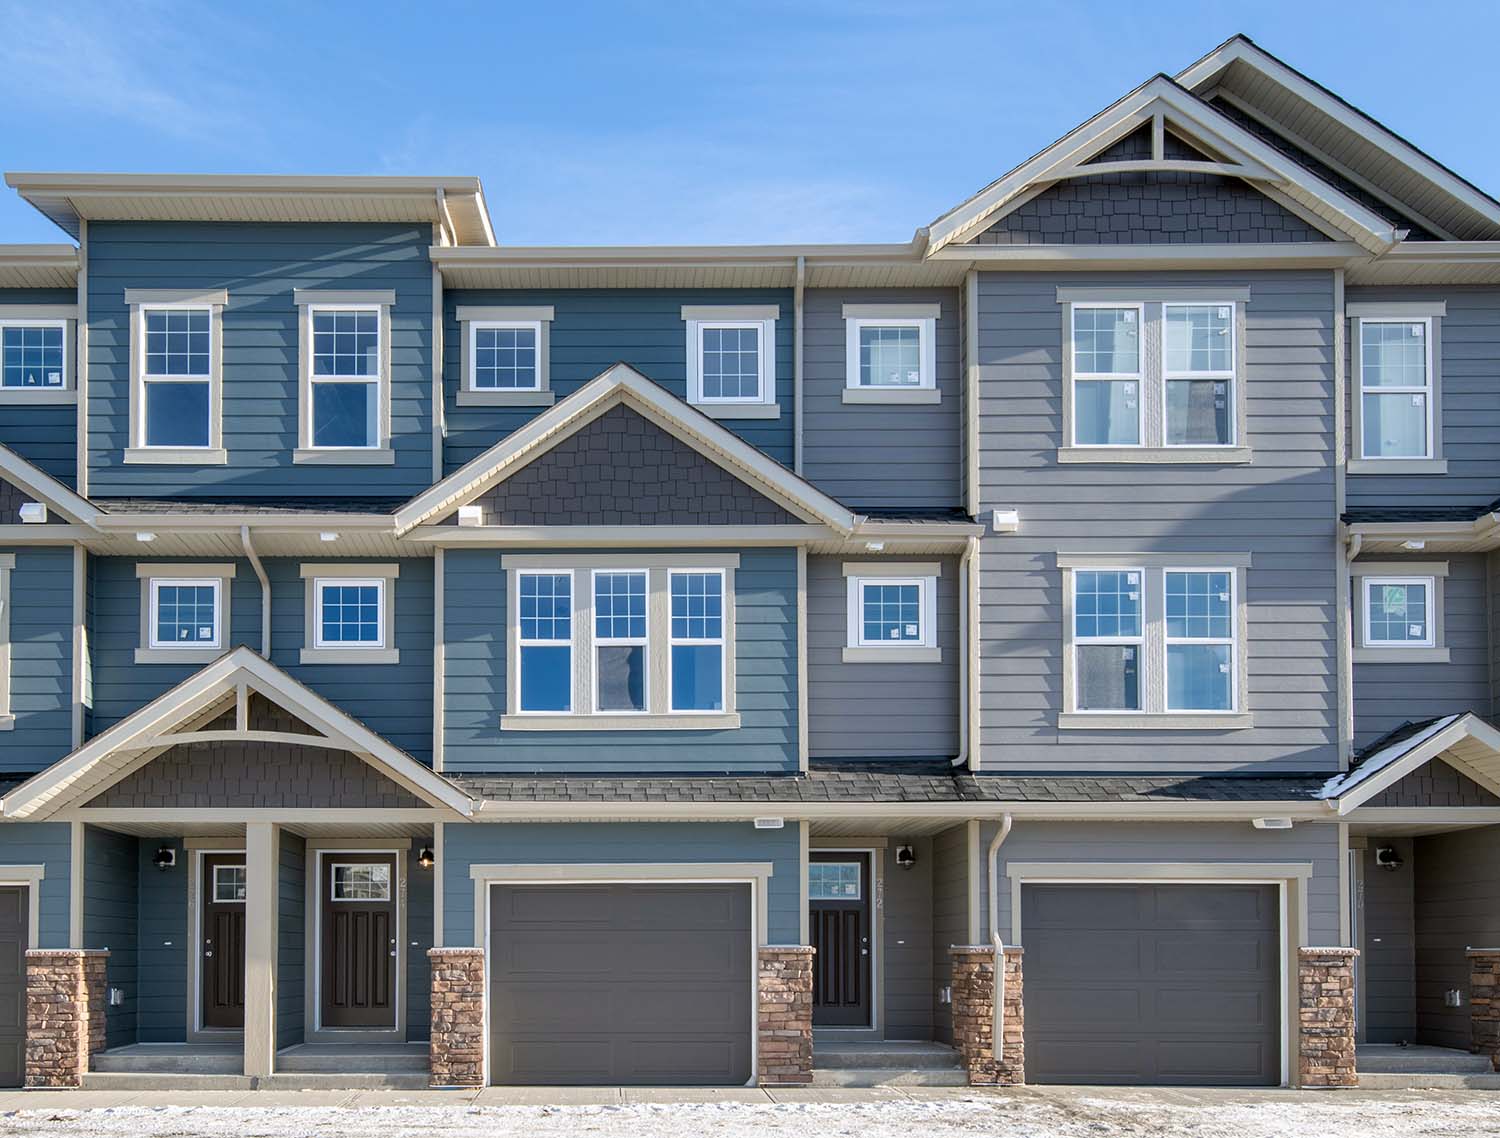 ZEN Riverstone townhomes with attached single garages